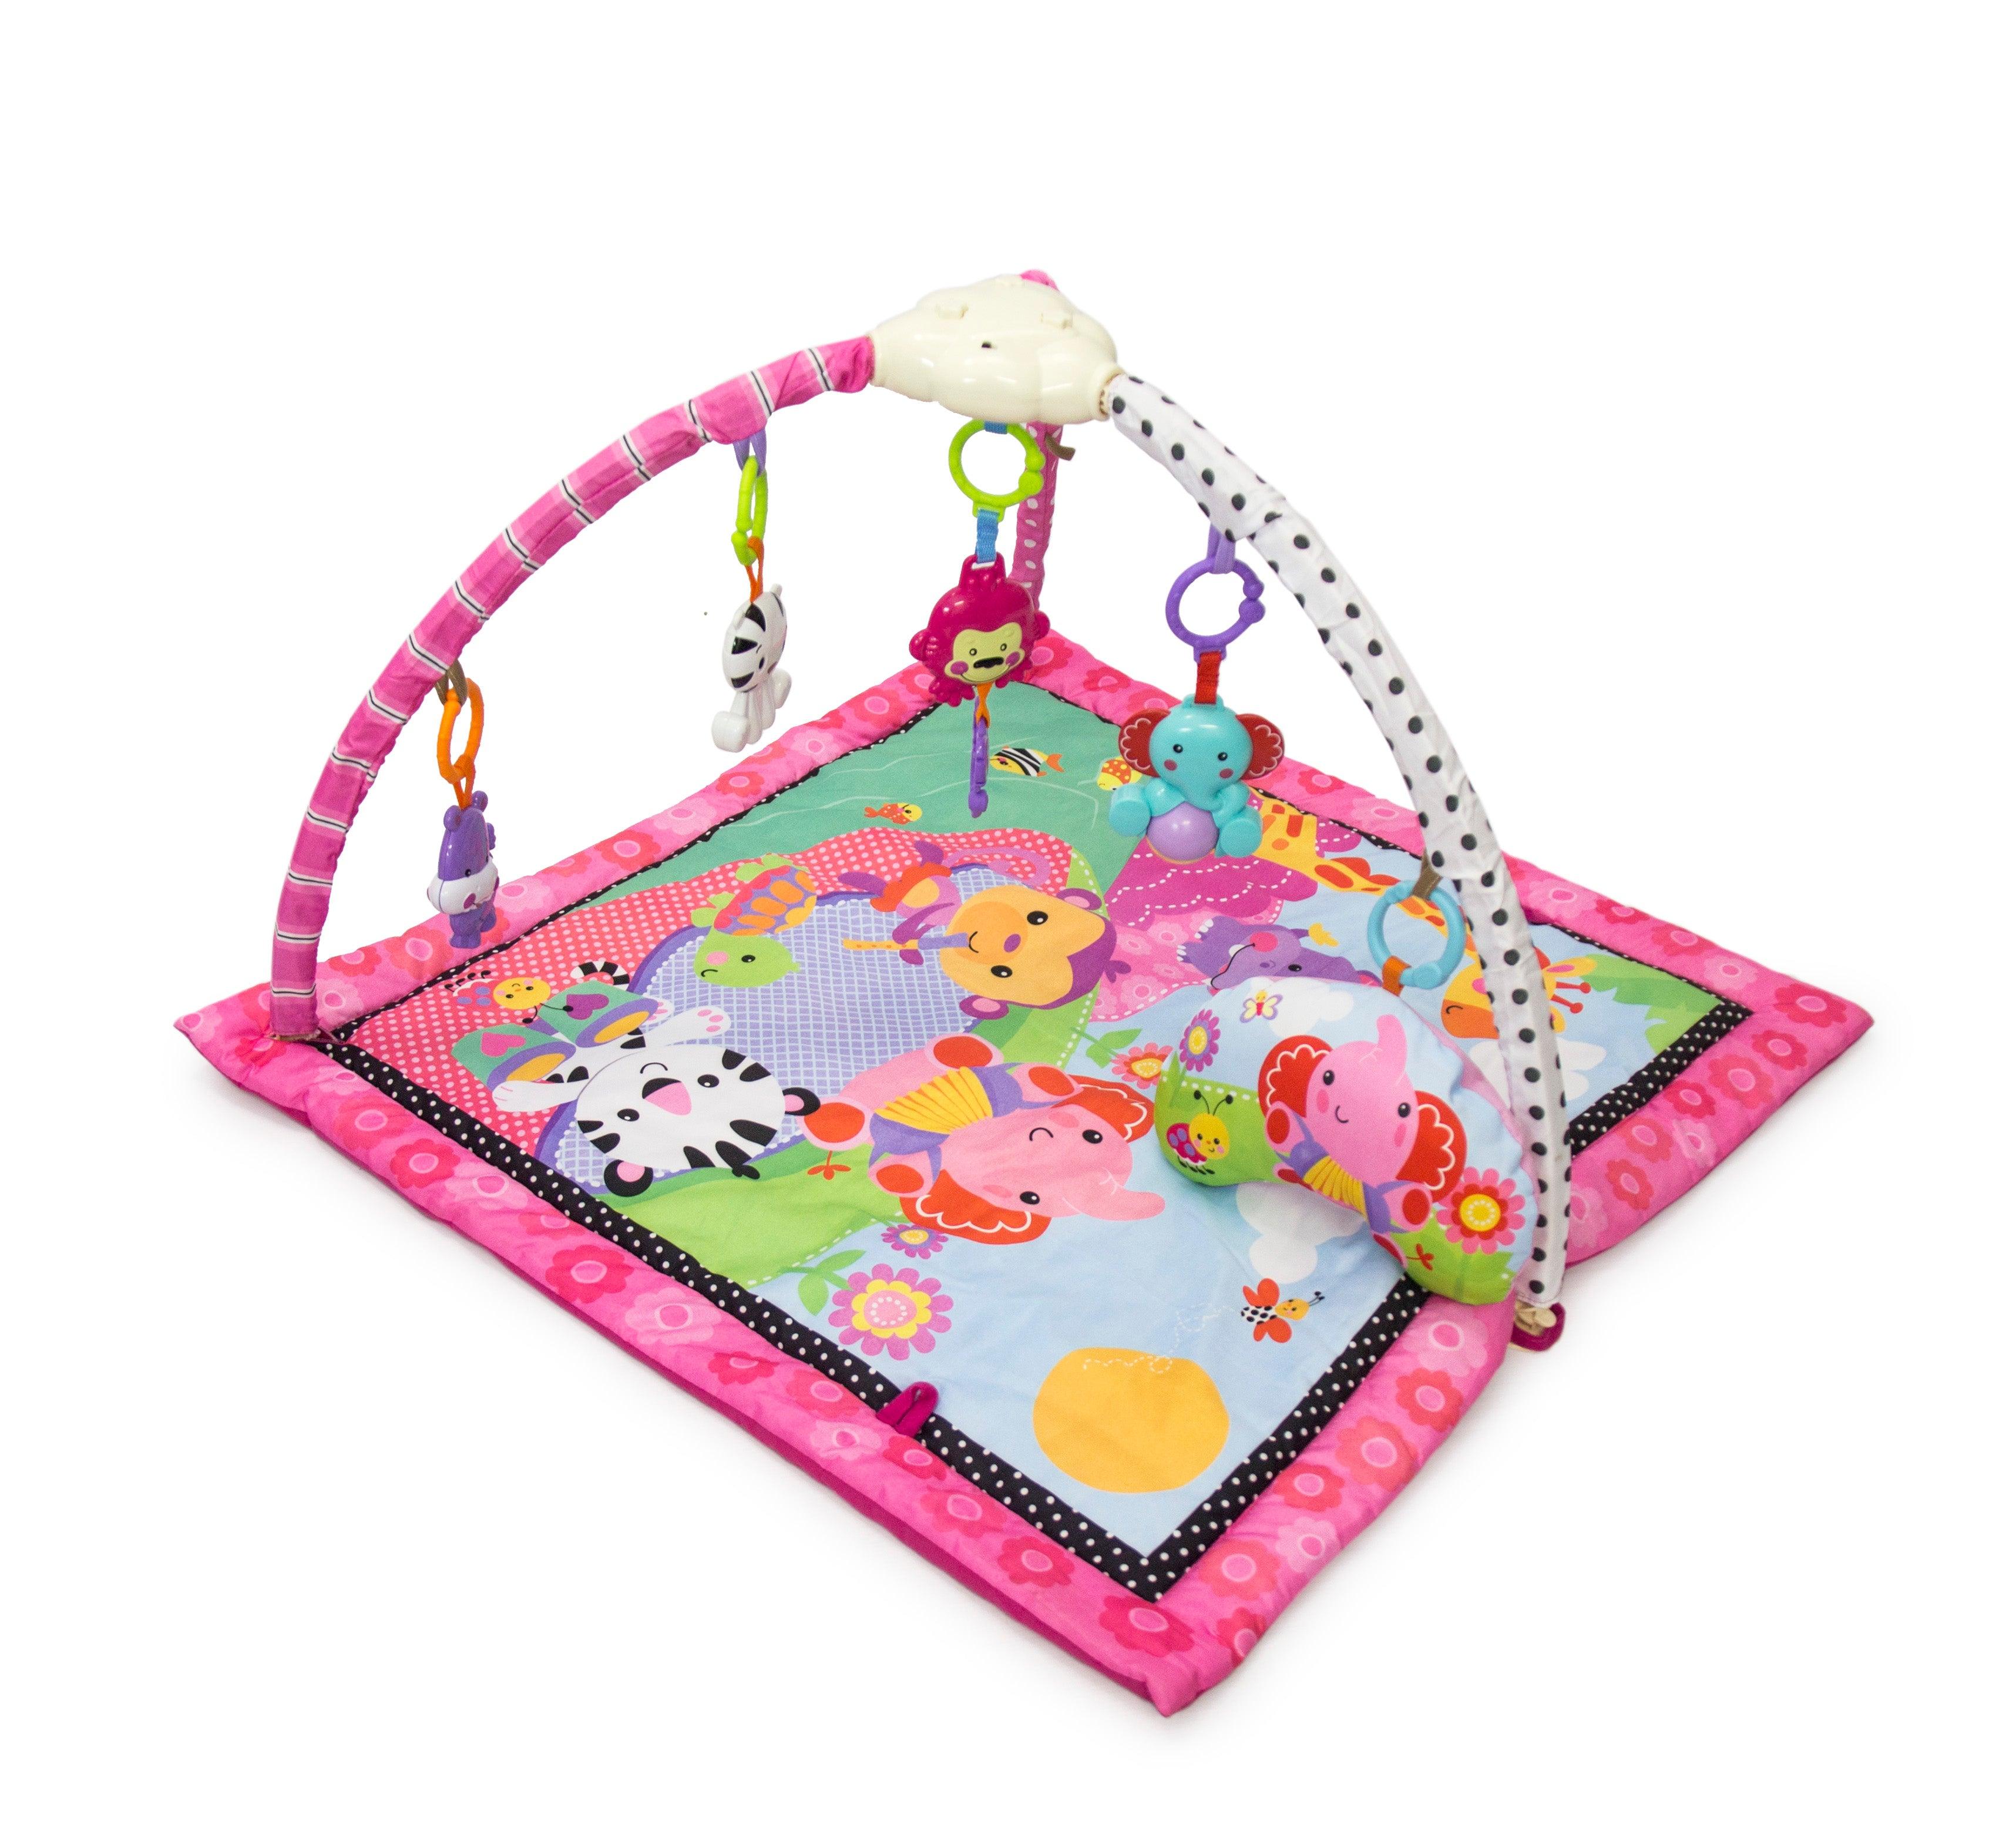 Nuovo Deluxe Pink Baby Play Mat - 4aKid